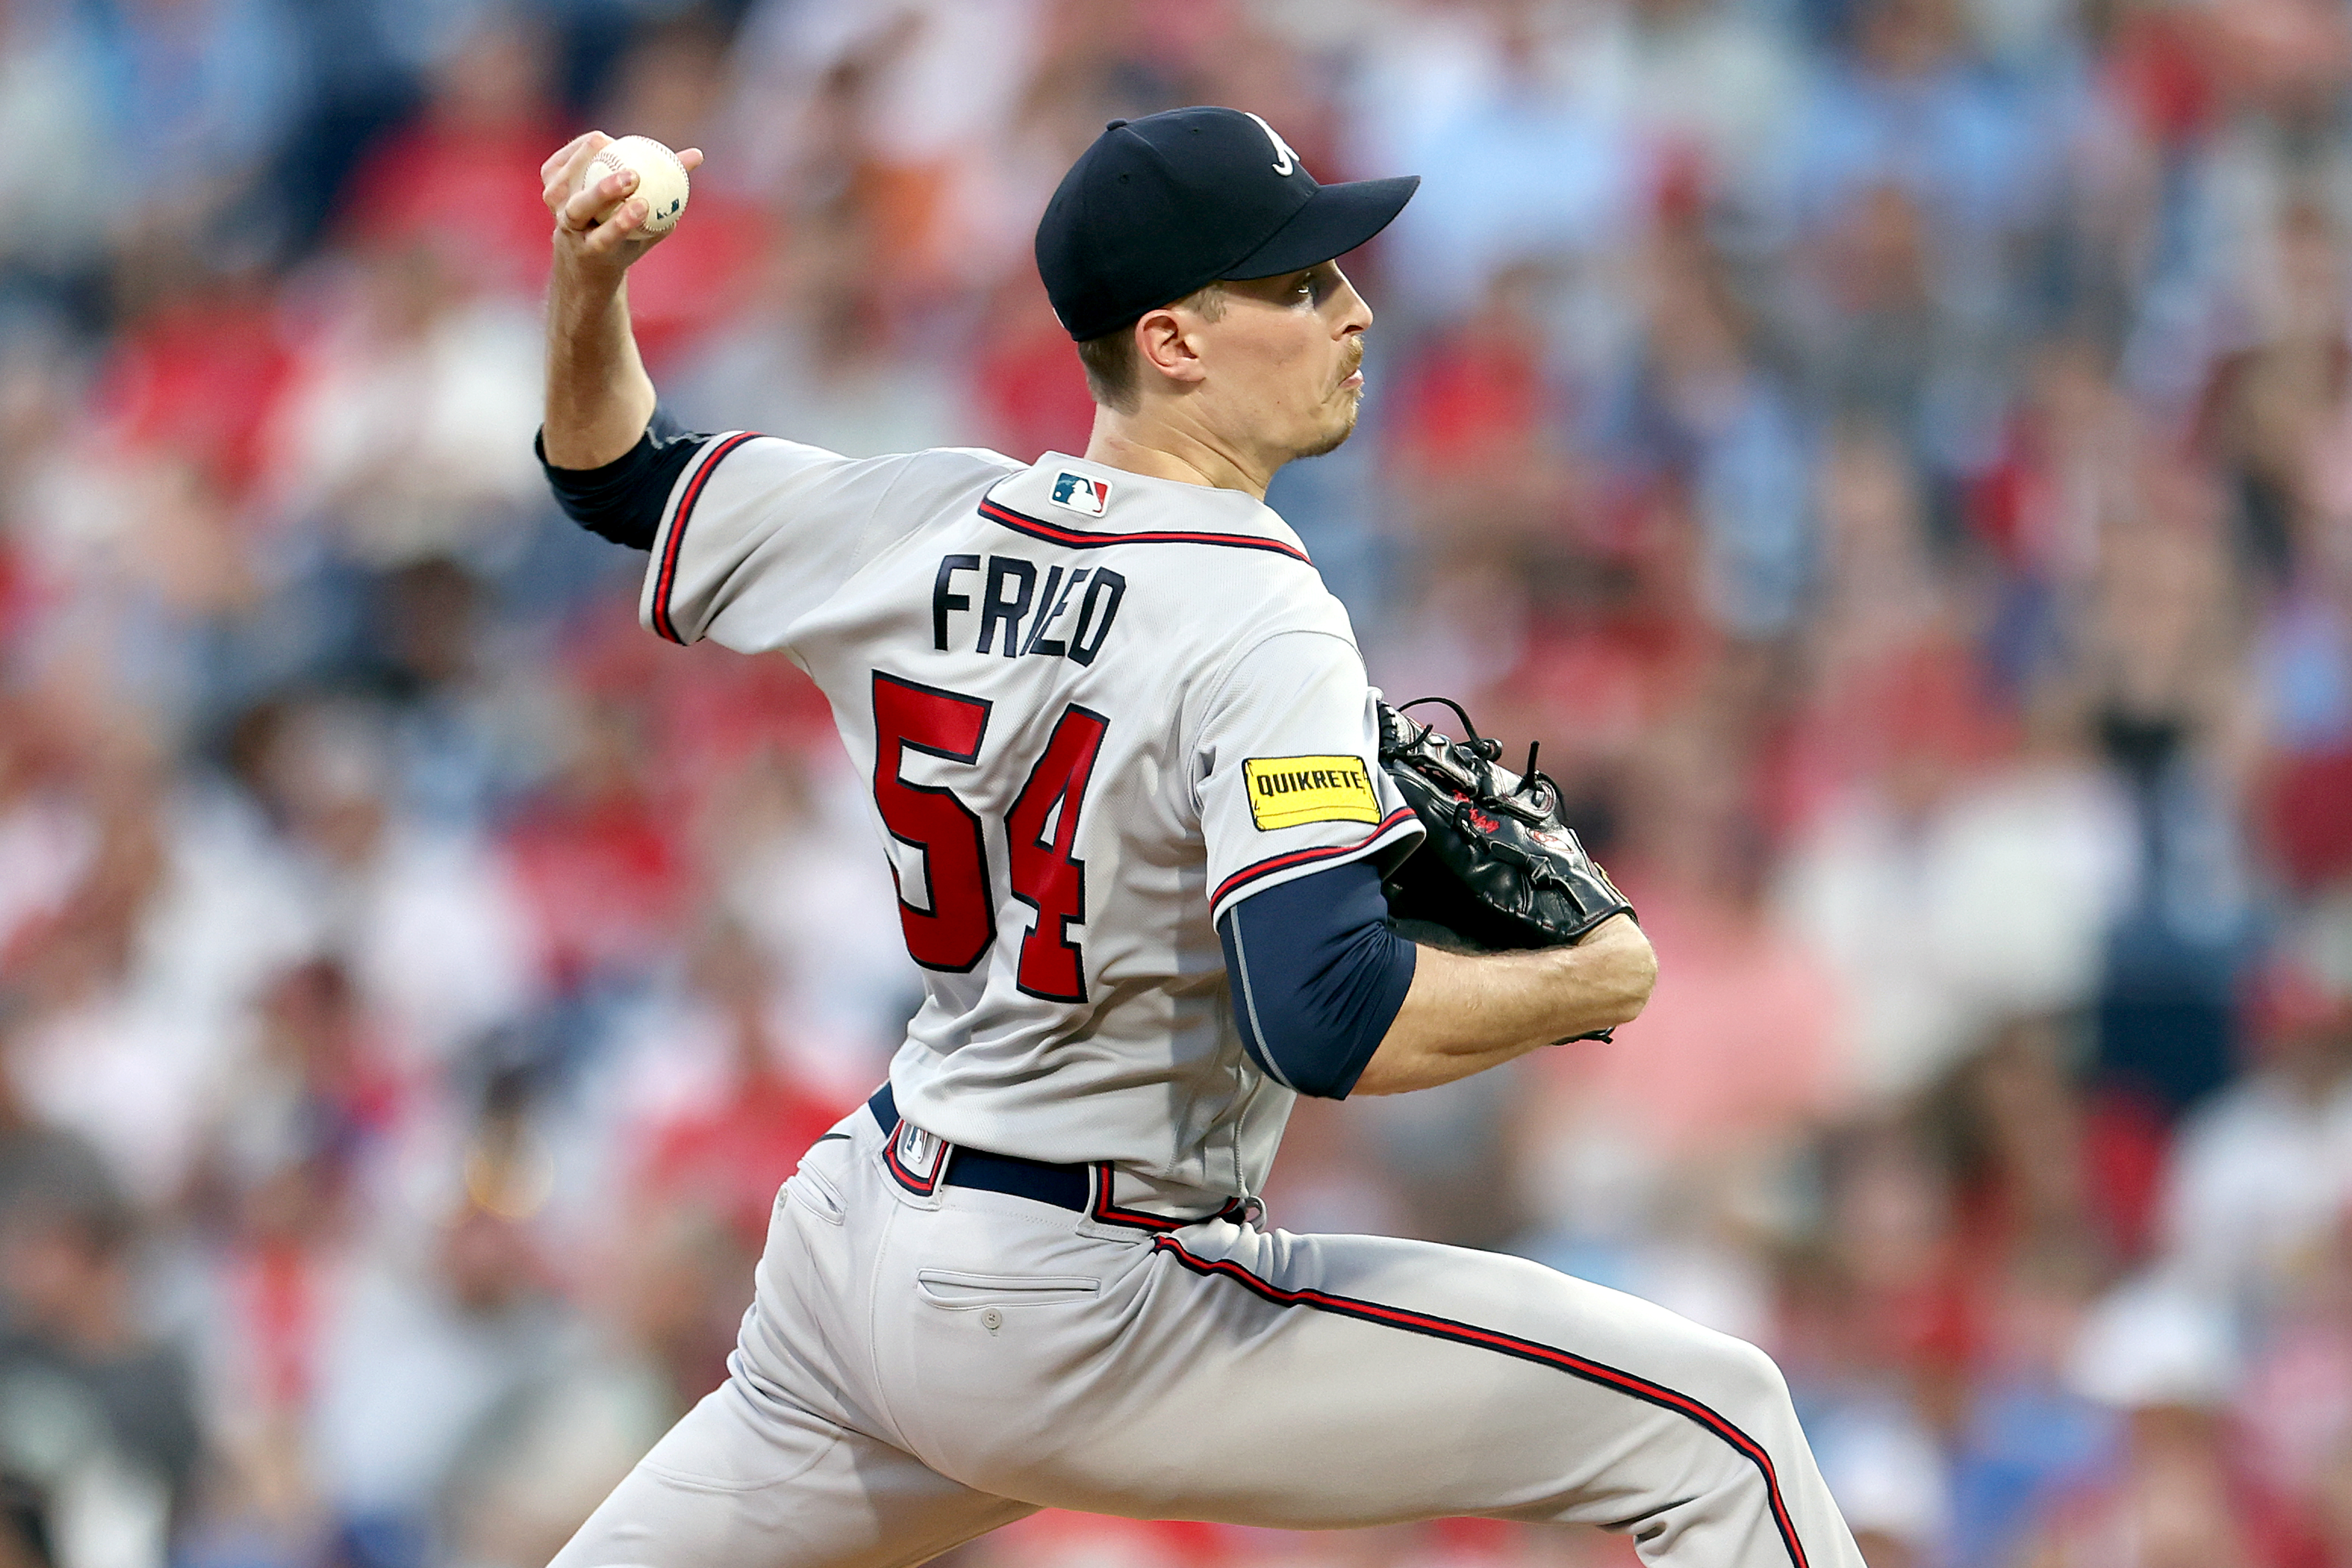 Max Fried of the Atlanta Braves pitches during the first inning against the Philadelphia Phillies at Citizens Bank Park on September 12, 2023 in Philadelphia, Pennsylvania.